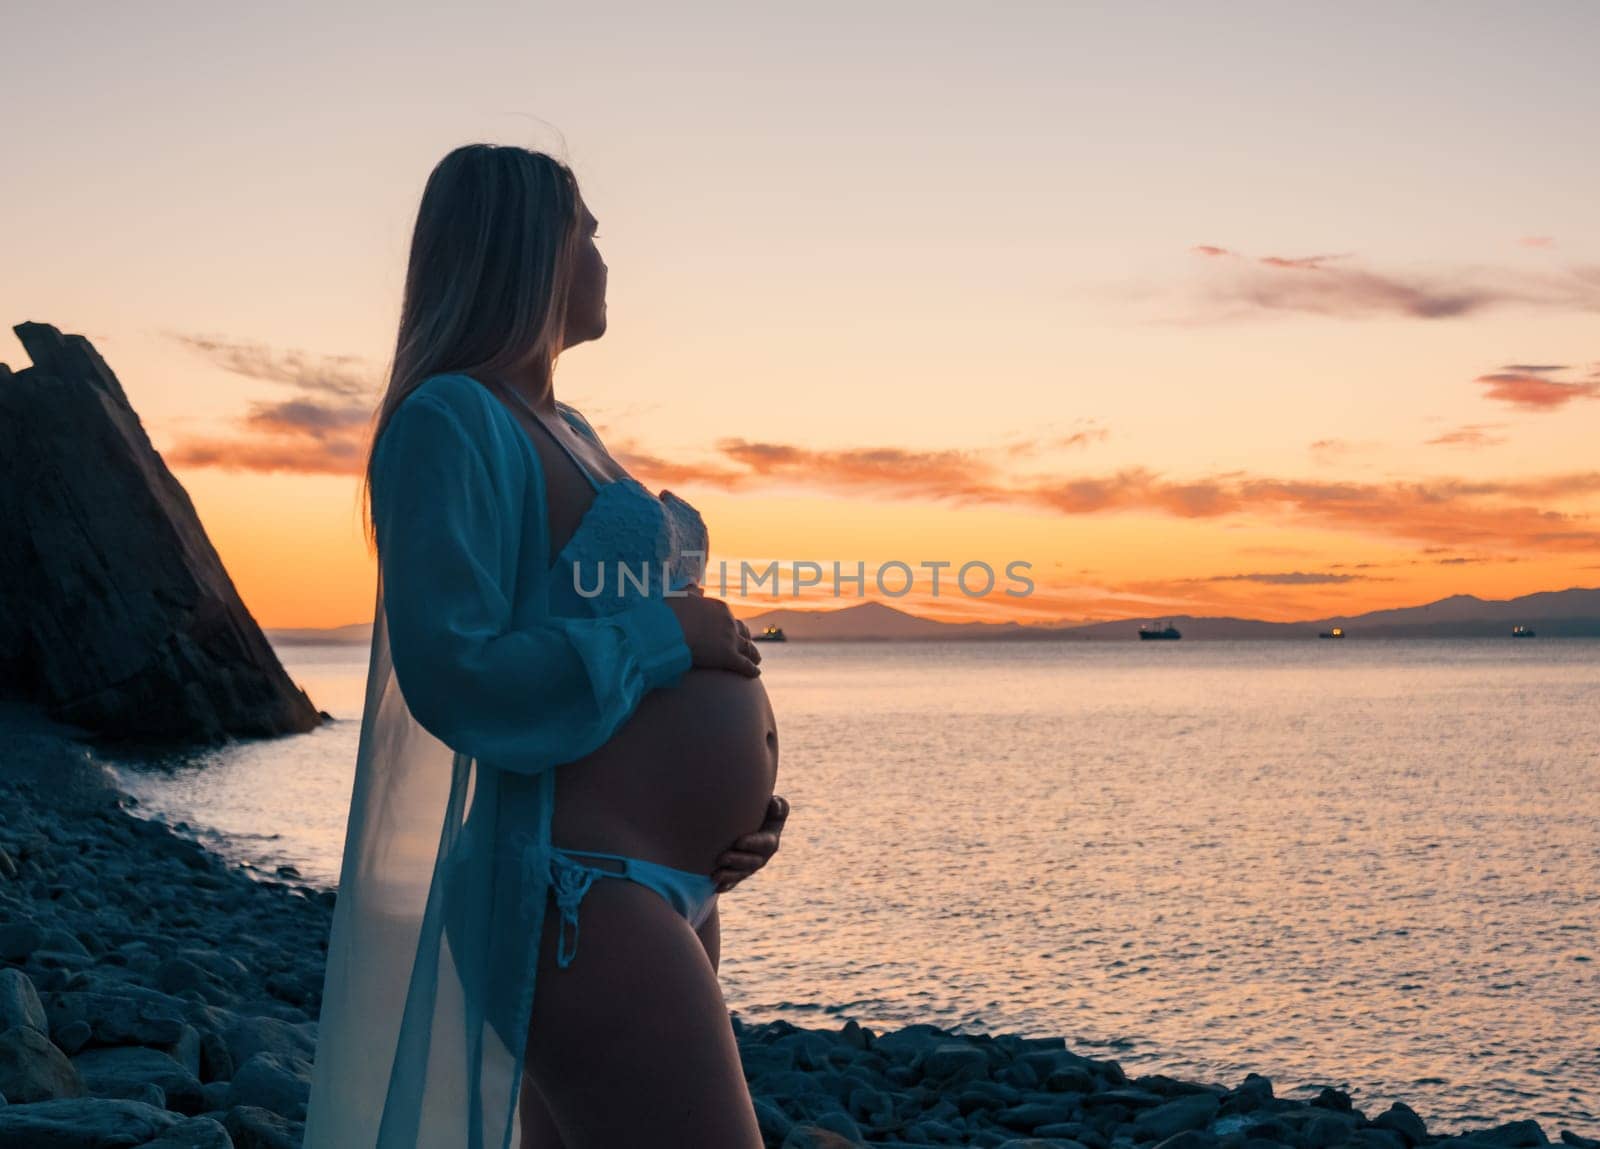 A pregnant woman in a white bikini stands on a rocky beach at sunrise, gently holding her belly. The background features calm water and a distant mountain range.